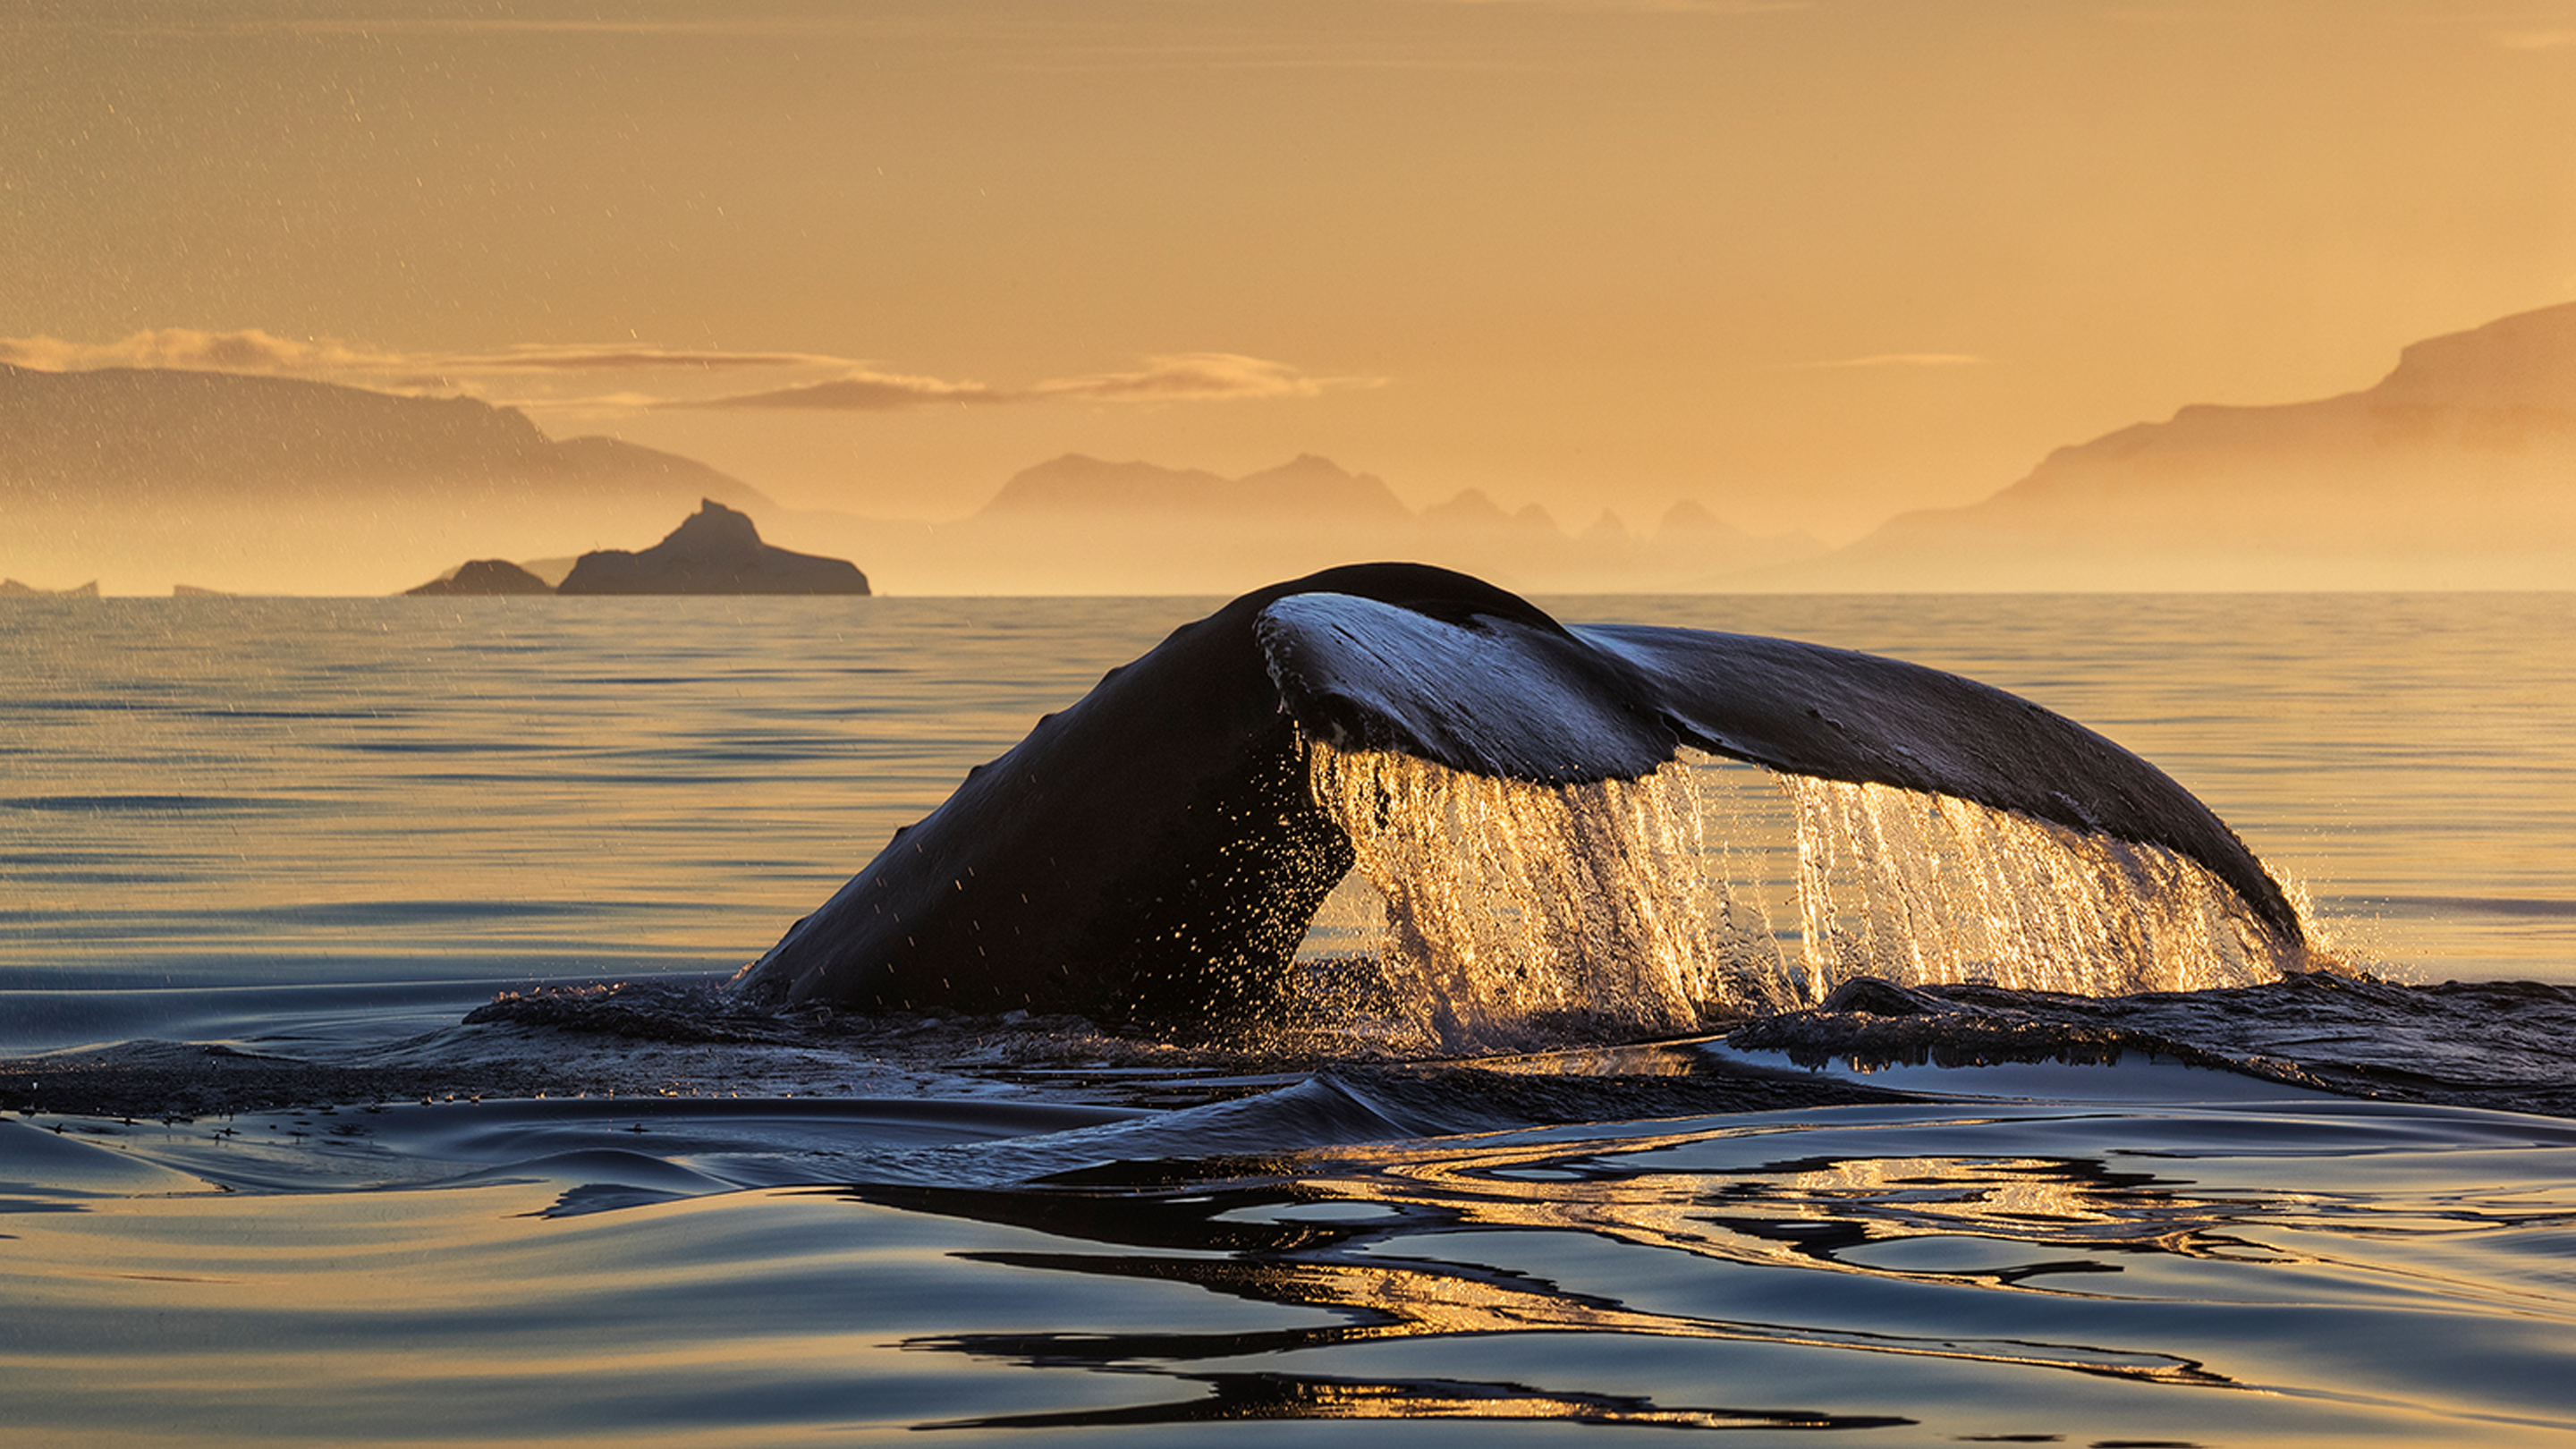 A whale's tail breaking the ocean surface with mountains and a sunset in the background